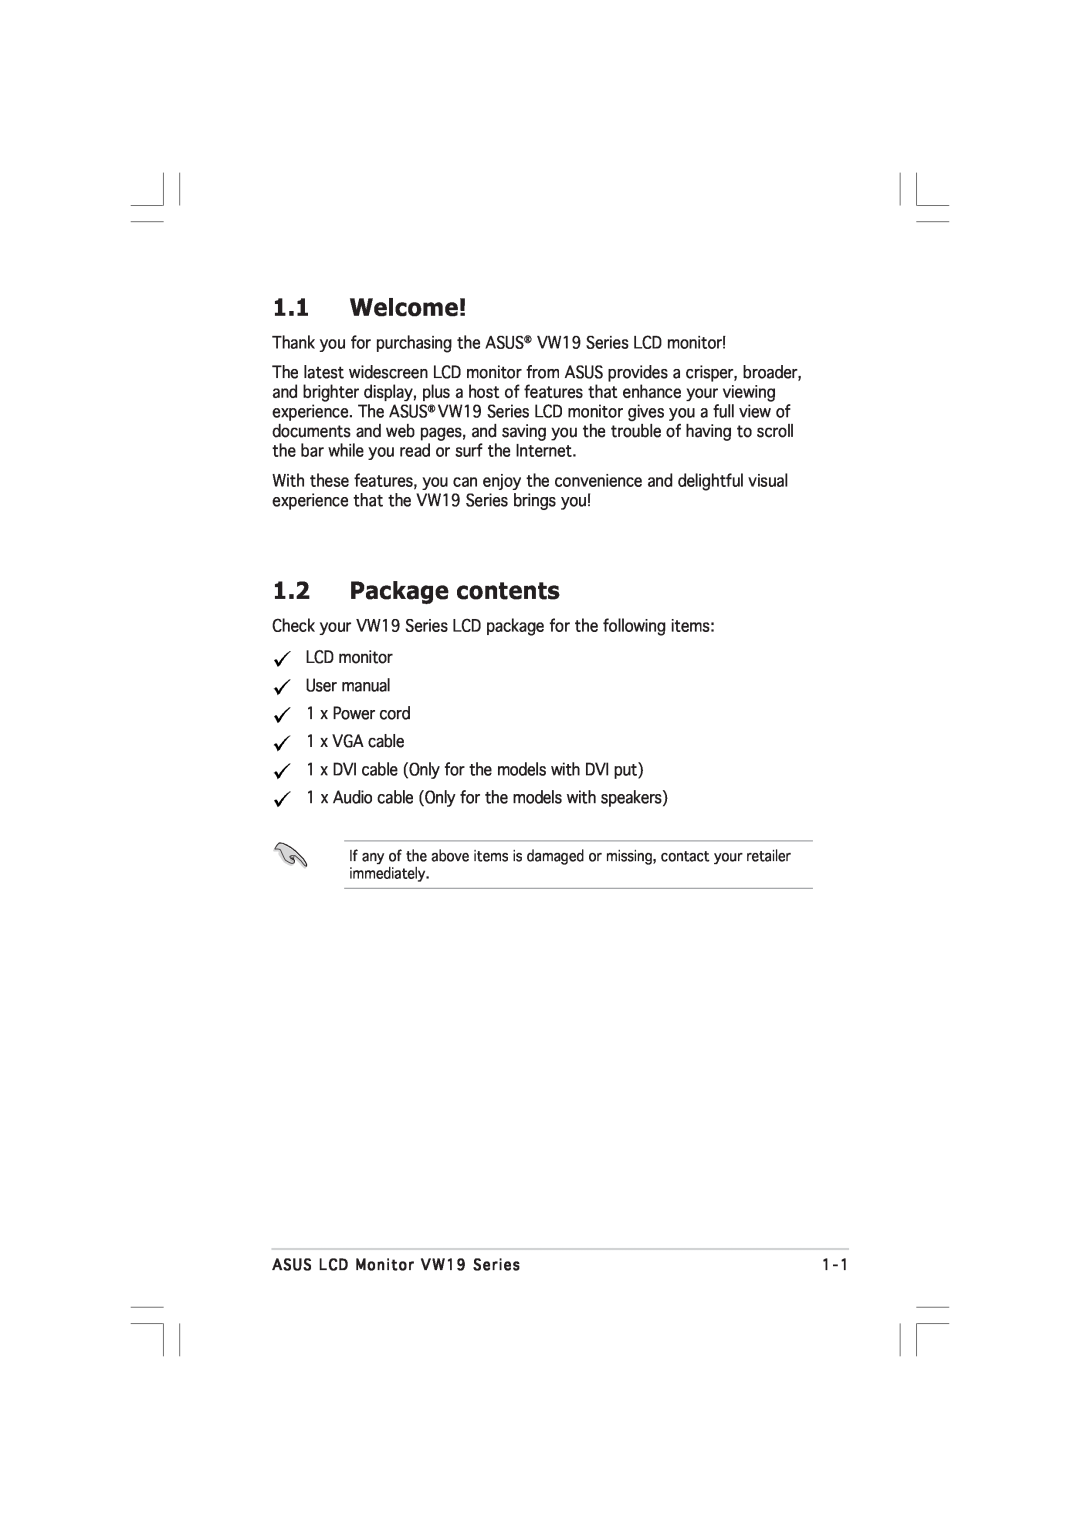 Asus VW191D manual Welcome, Package contents 